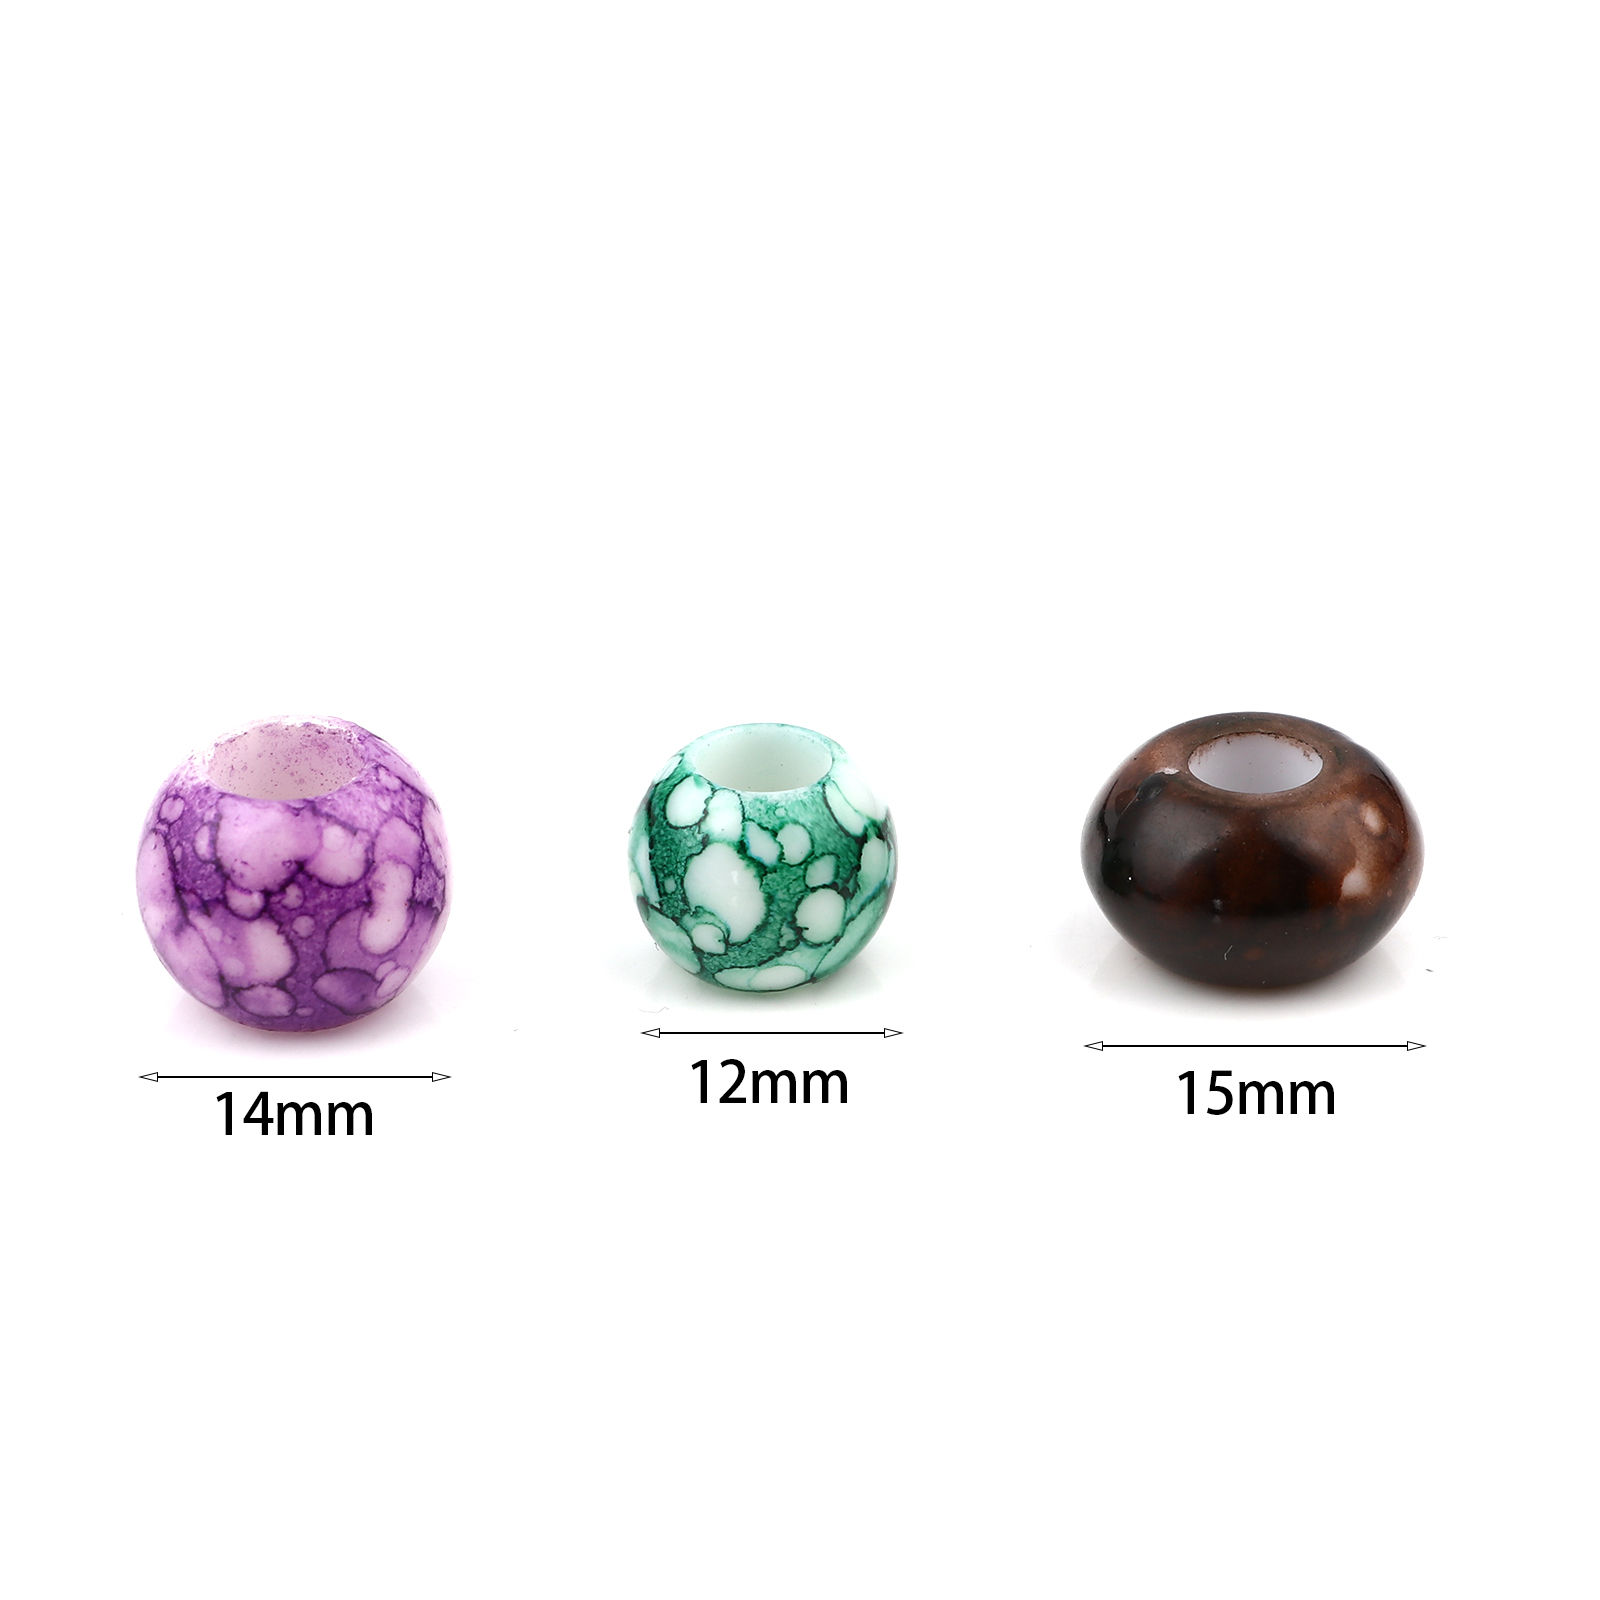 Picture of Acrylic Beads Round At Random Color 100 PCs